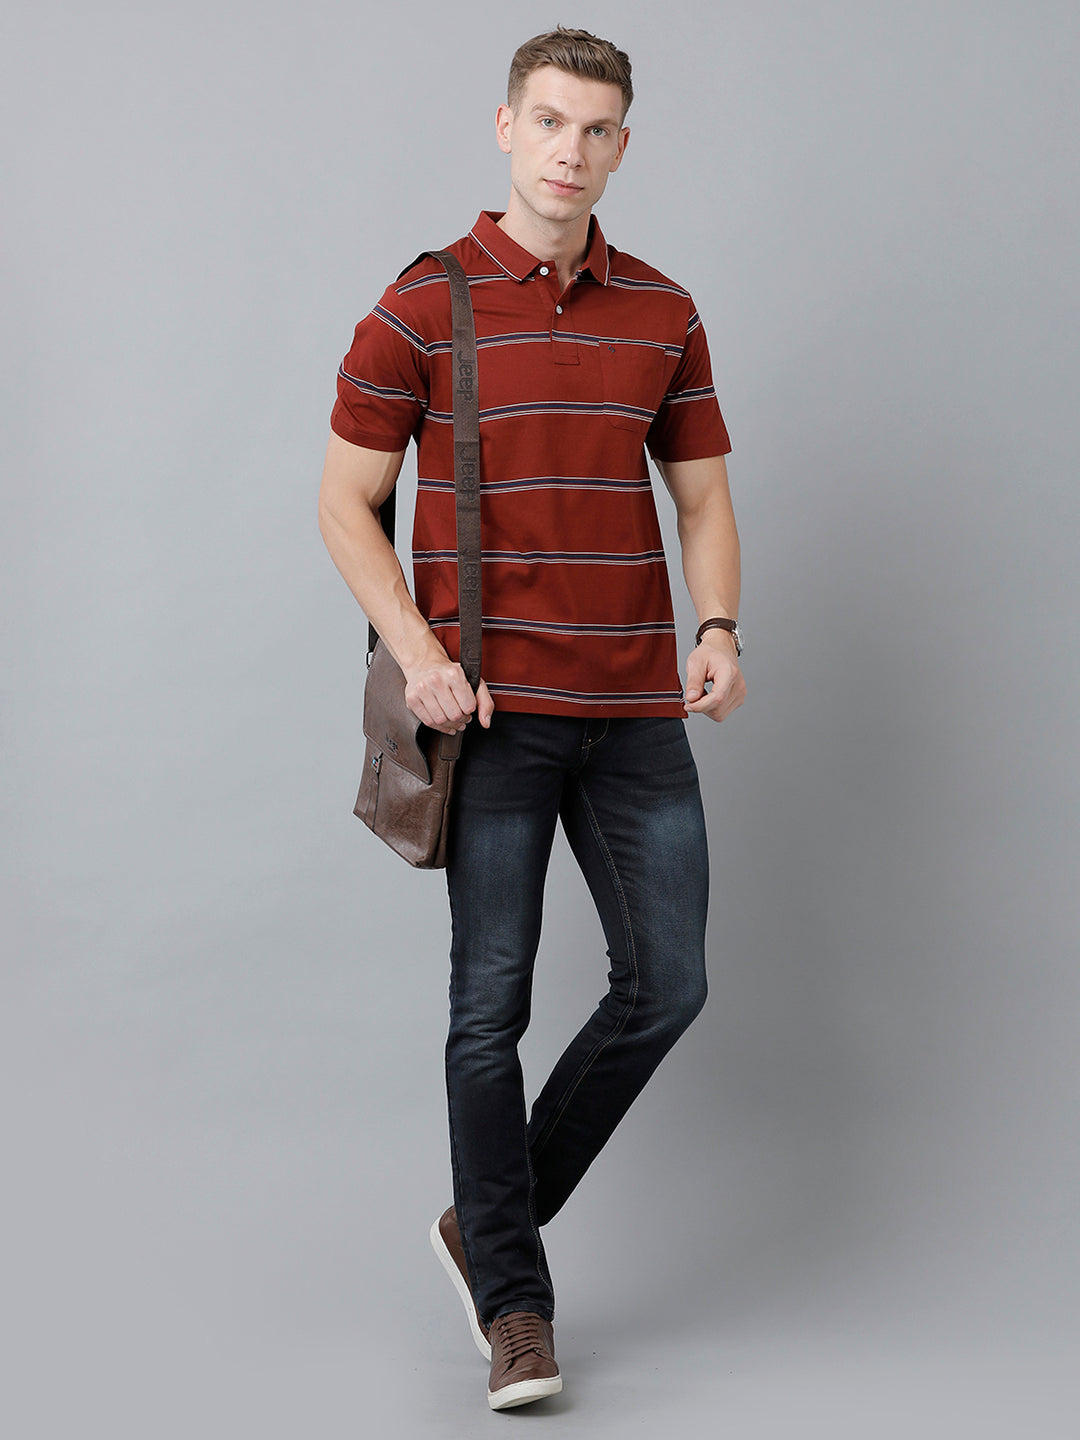 Classic Polo Men's Cotton Half Sleeve Striped Authentic Fit Polo Neck Red Color T-Shirt | Ap - 90 A